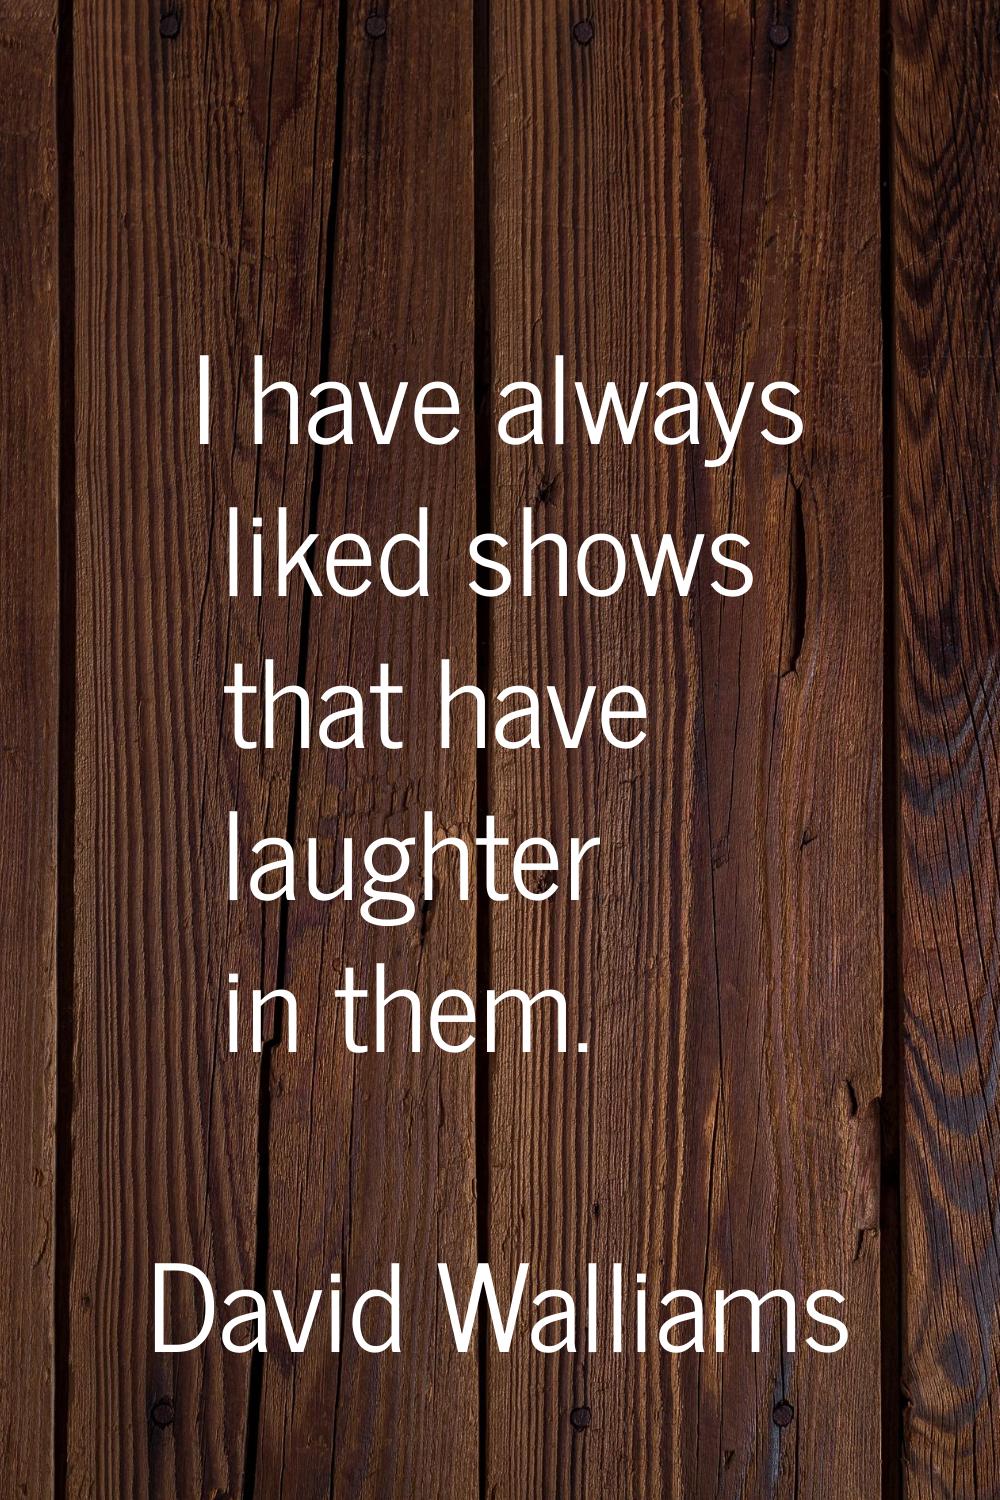 I have always liked shows that have laughter in them.